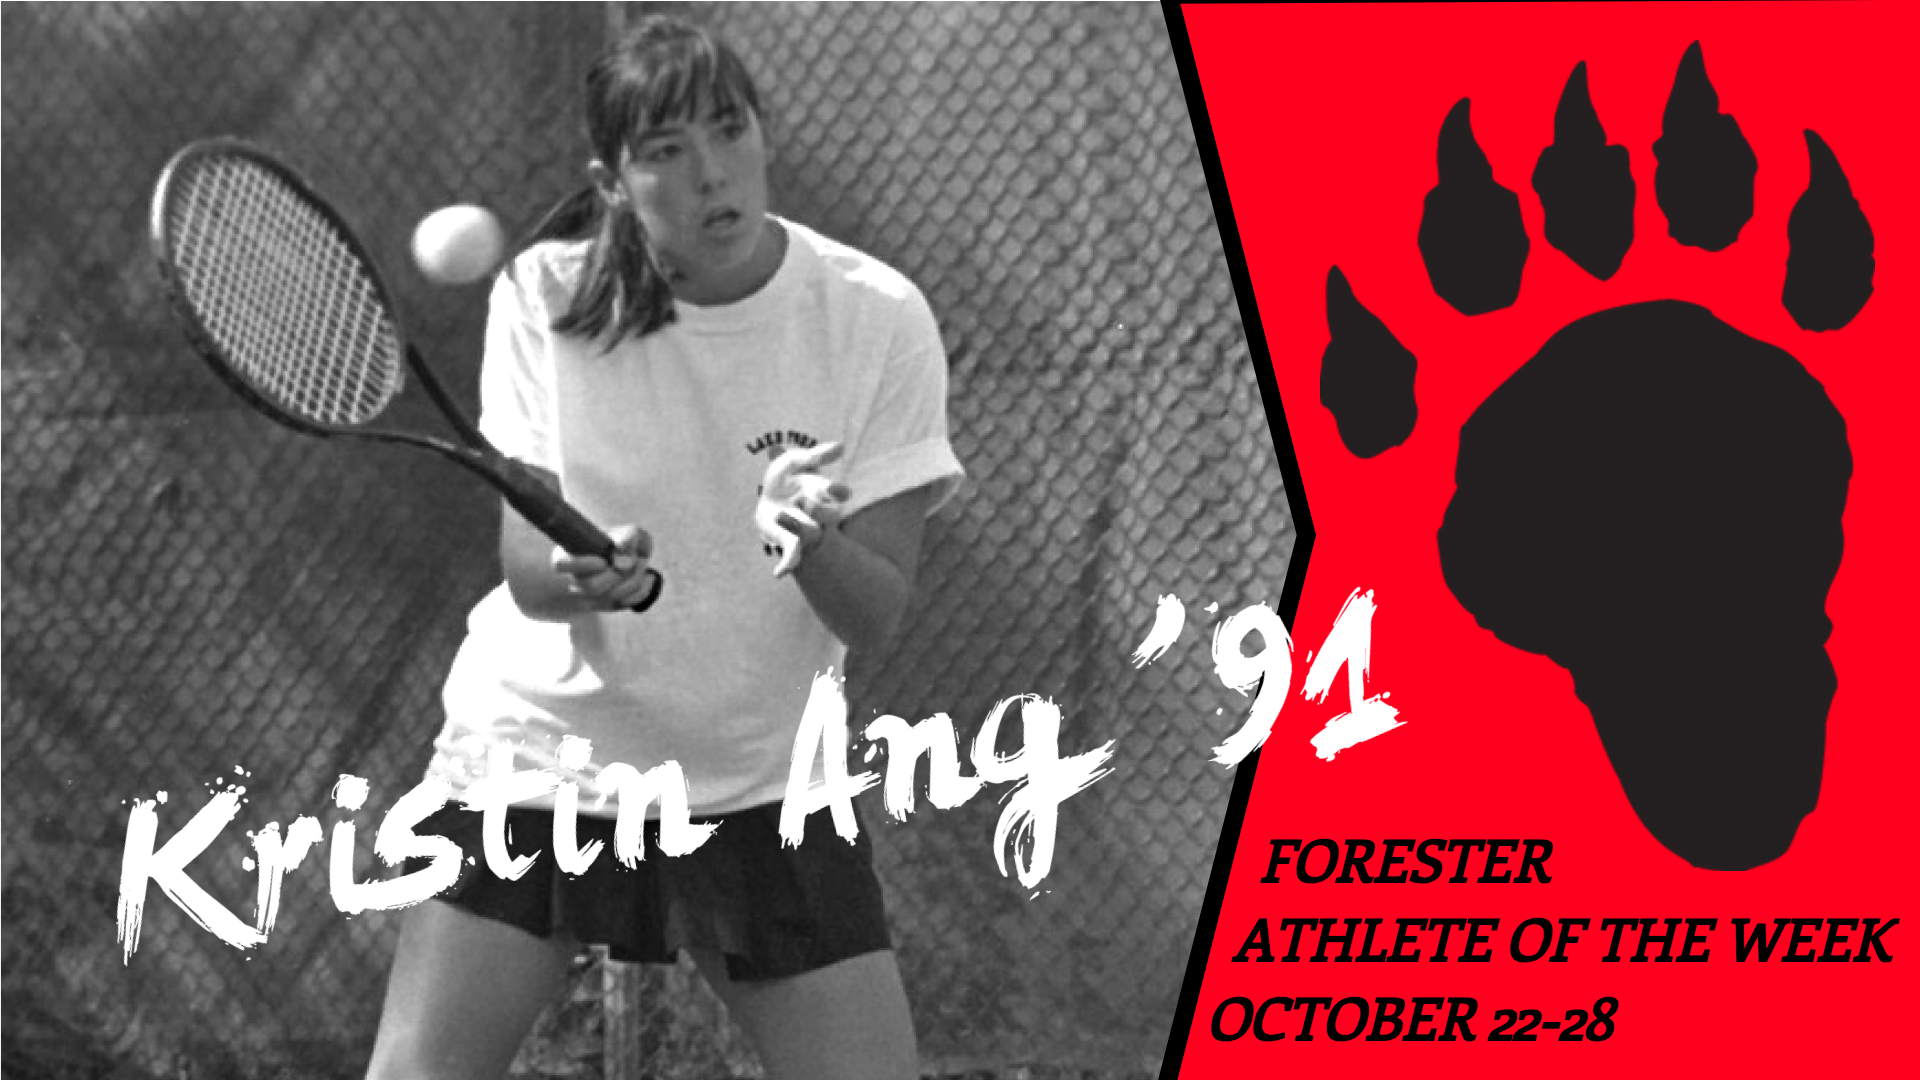 Kristin Ang '91 Named Forester Athlete of the Week